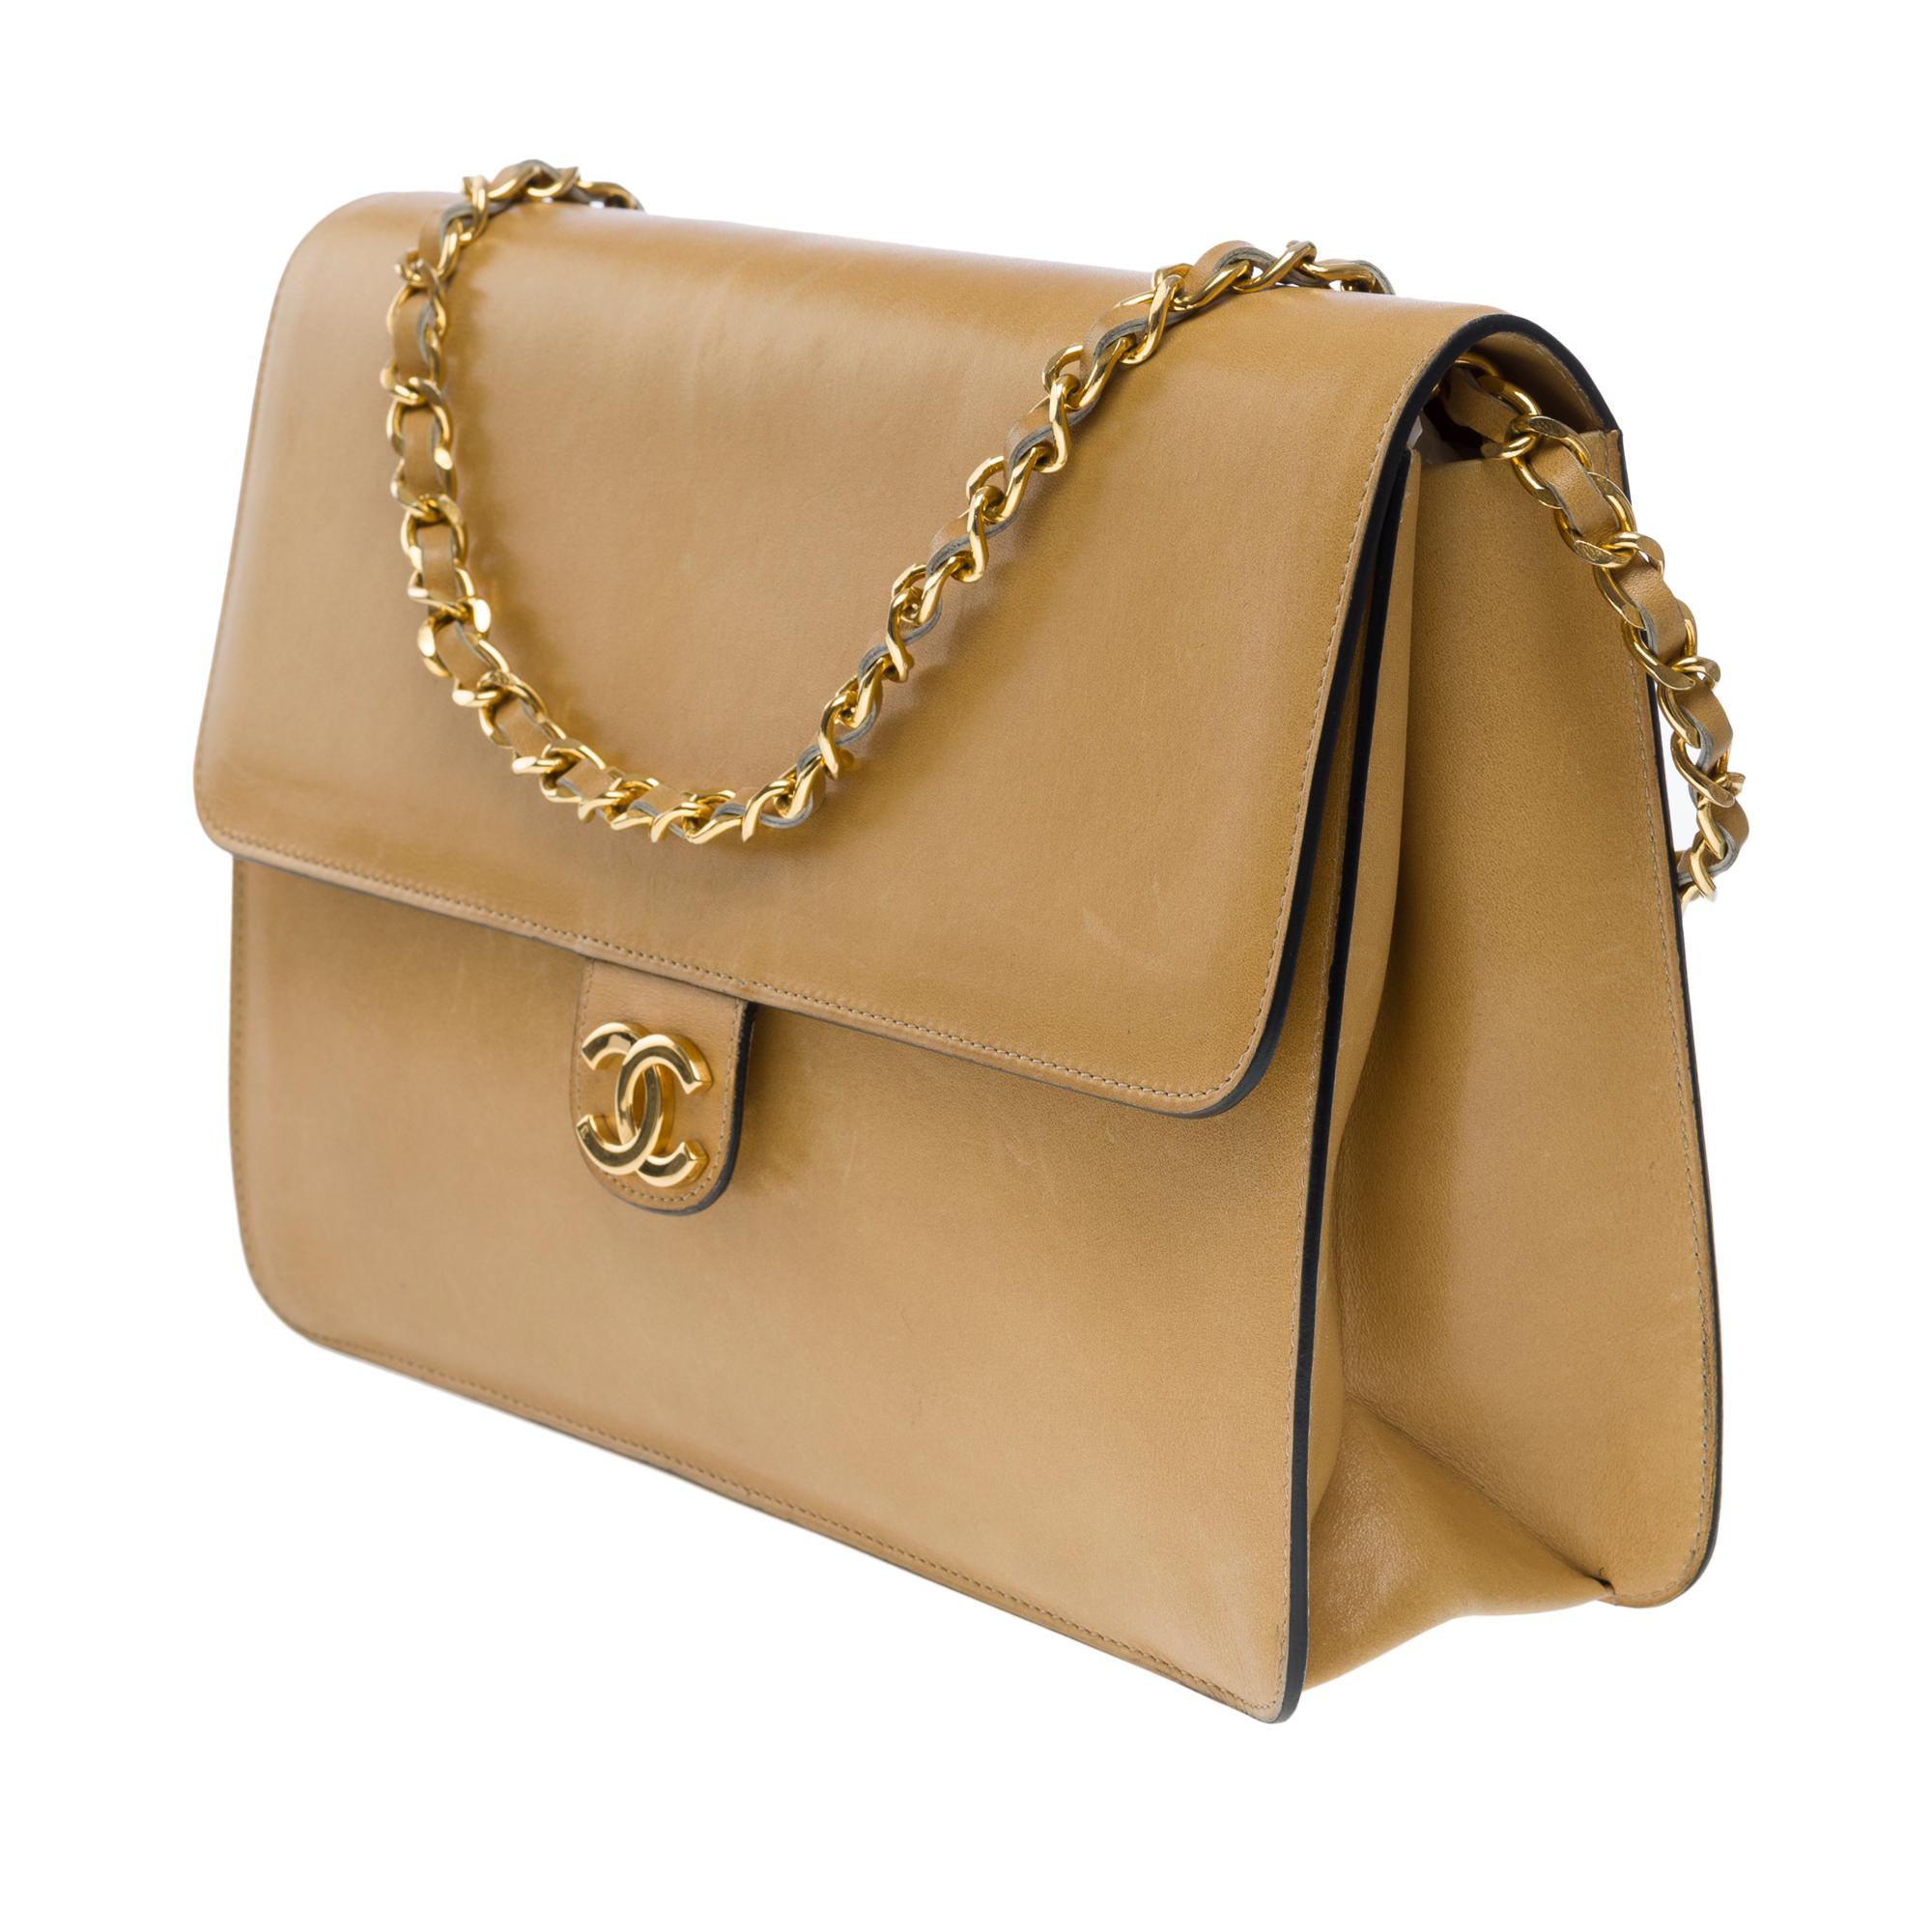 Women's Gorgeous Chanel Classic shoulder flap bag in beige box calfskin leather, GHW For Sale